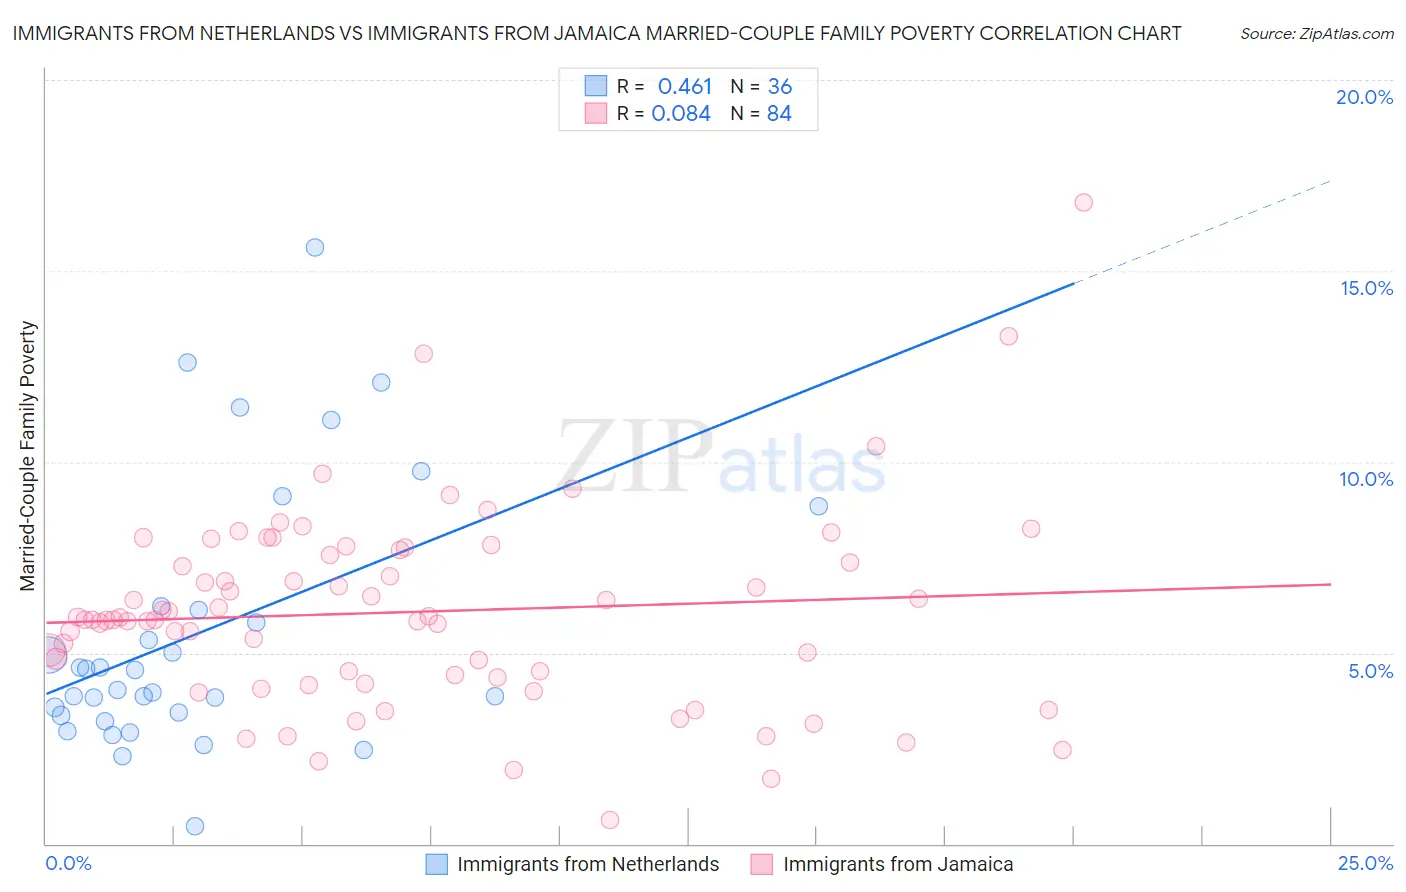 Immigrants from Netherlands vs Immigrants from Jamaica Married-Couple Family Poverty